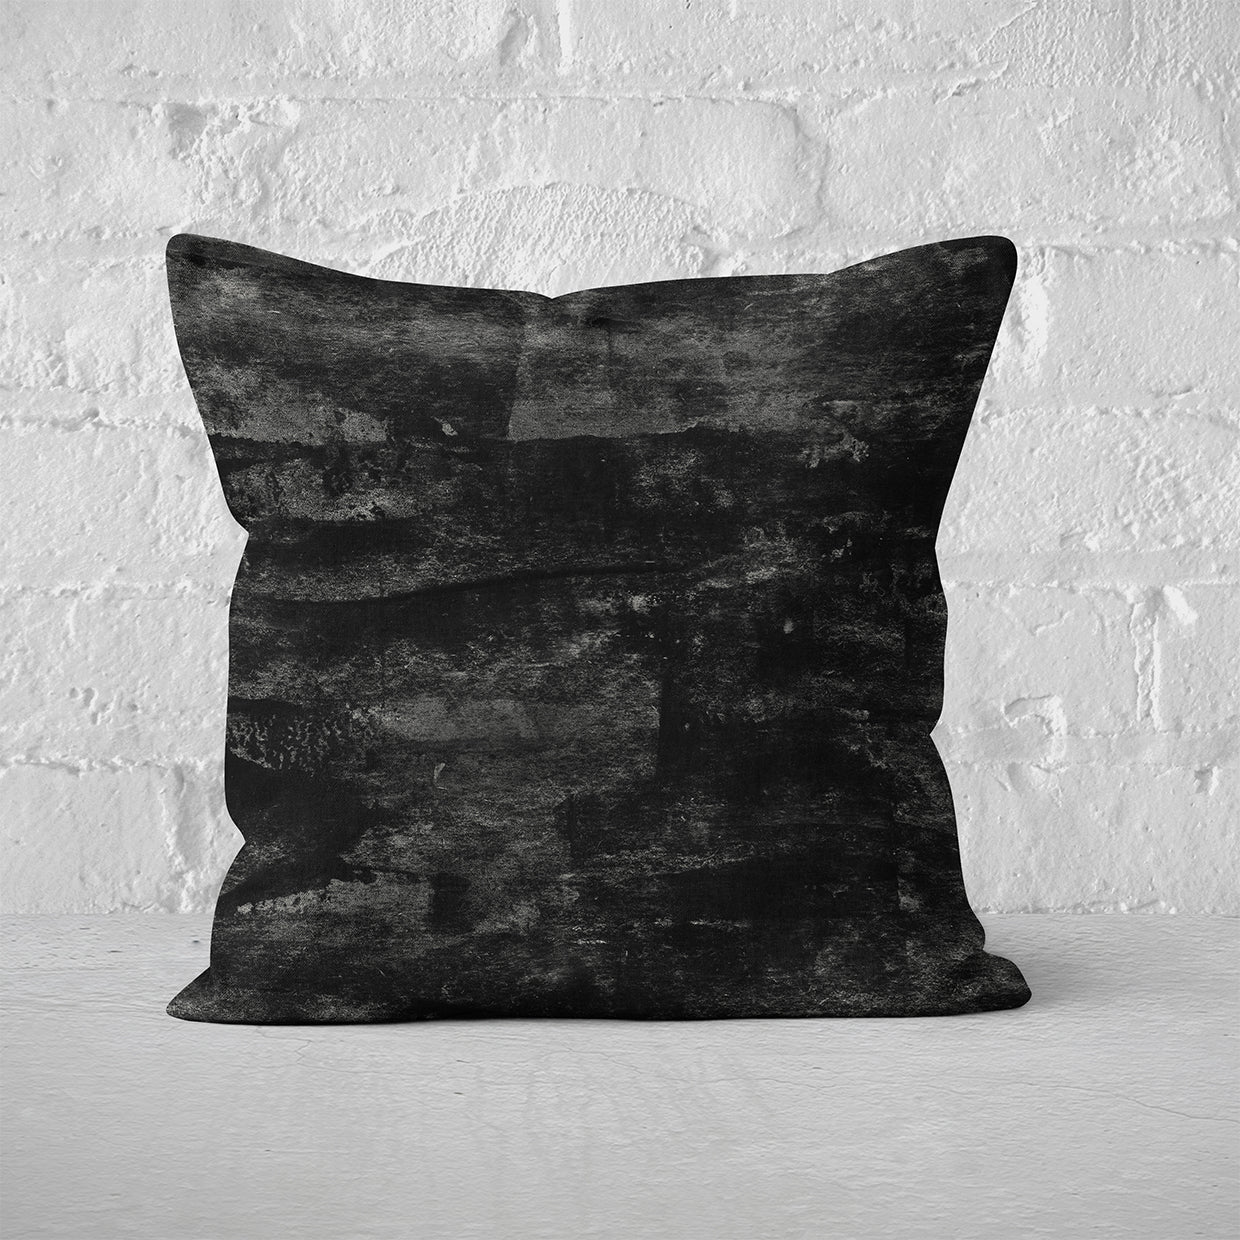 Pillow Cover Art Feature 'Satellite' - Black & Grey - Cotton Twill